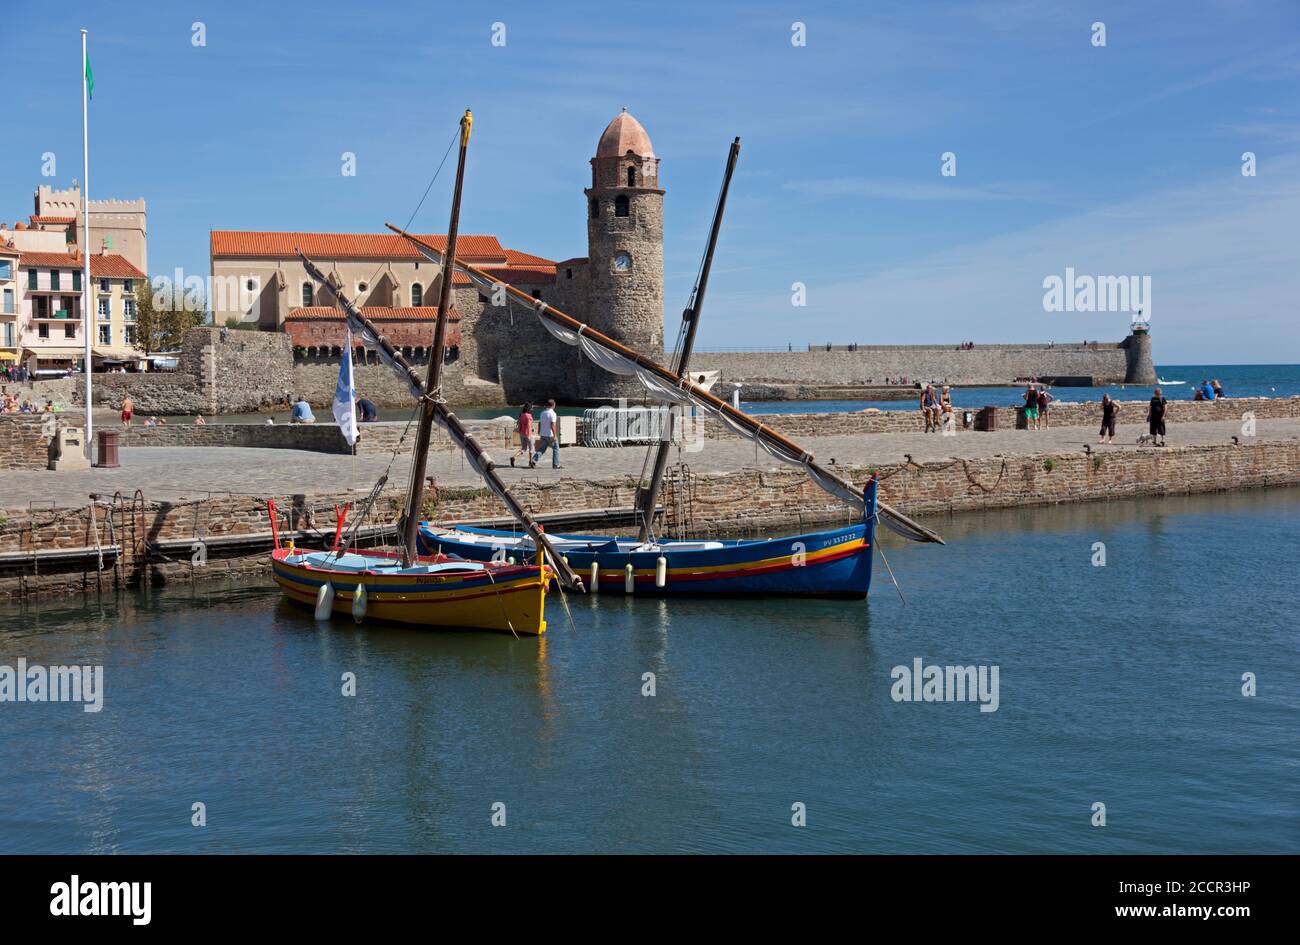 The picturesque harbour and seaside resort of Collioure in the south of France Stock Photo